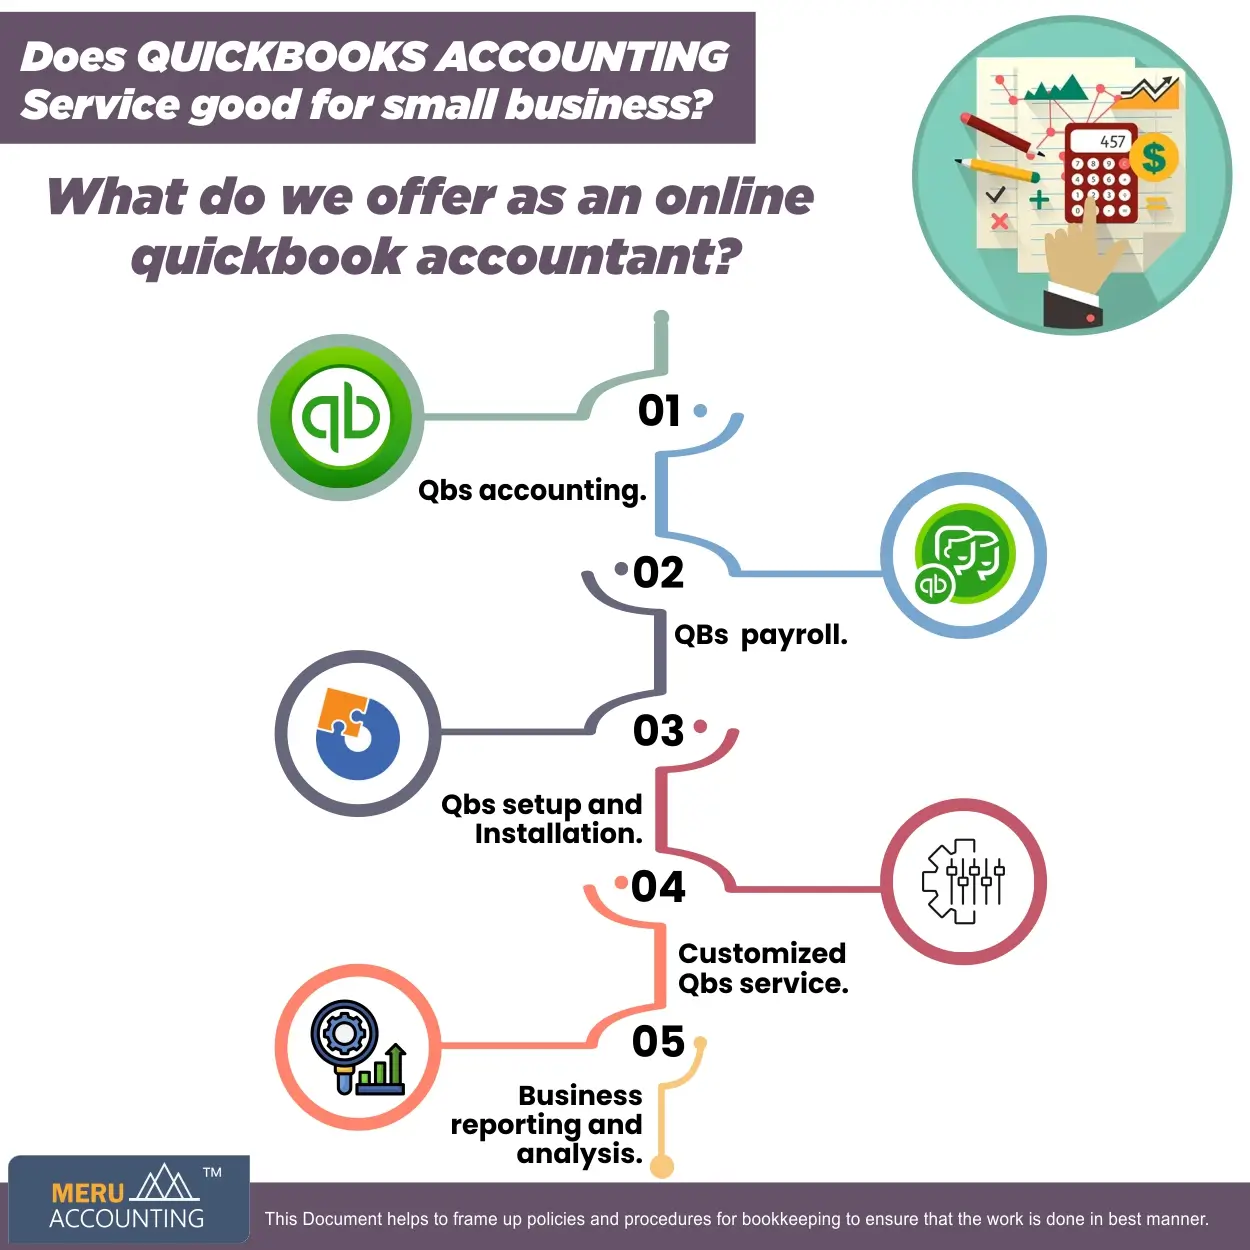 Does Quickbook Accounting Service Suitable for small businesses?